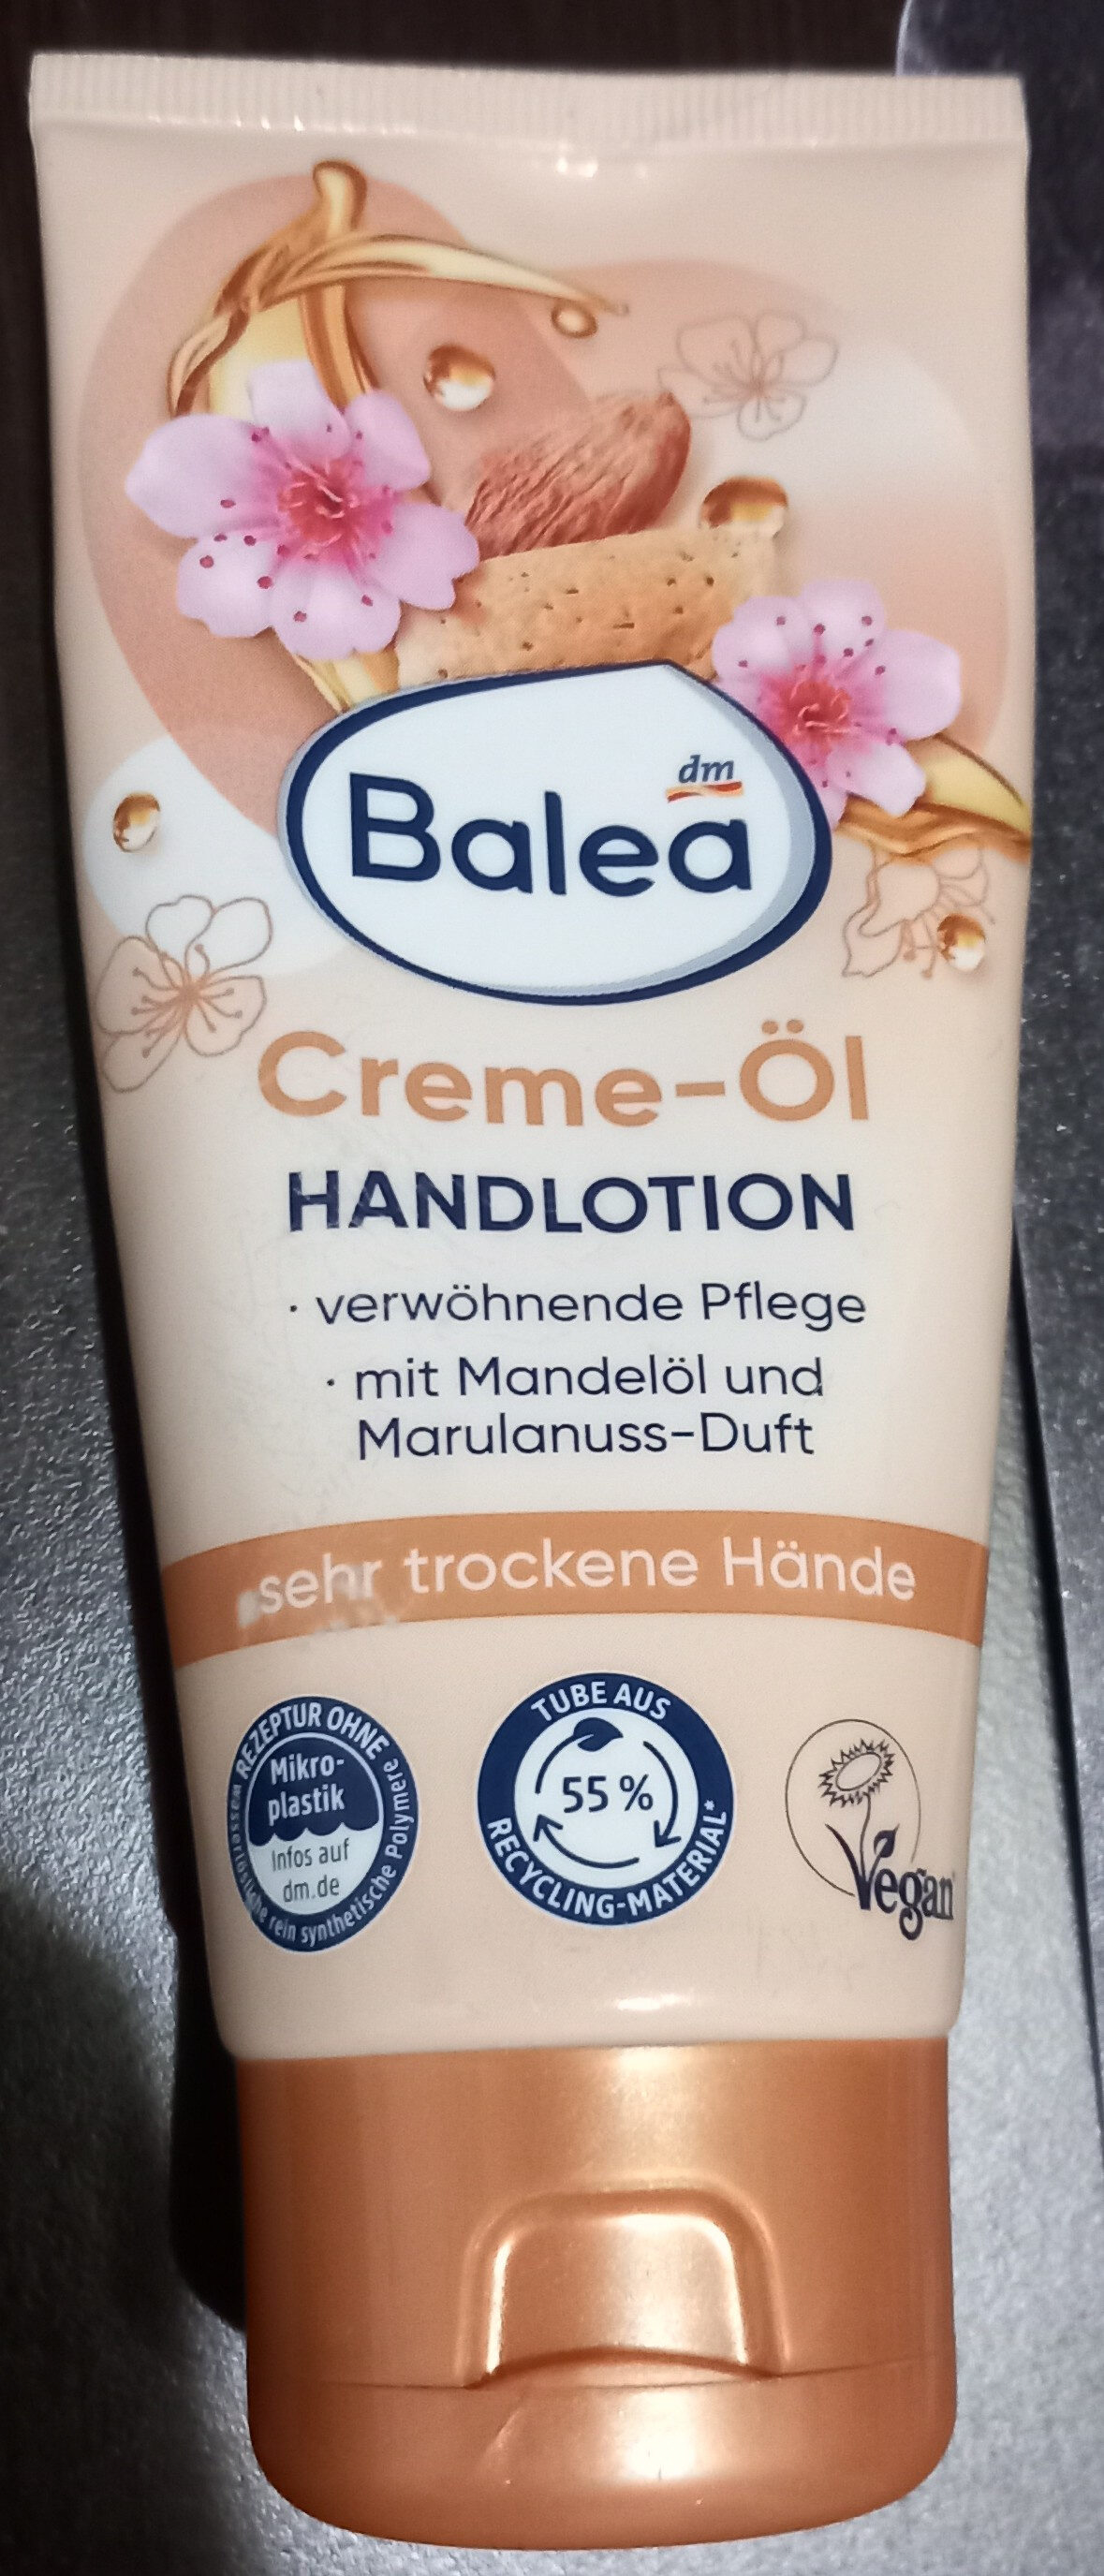 hand lotion - Product - en